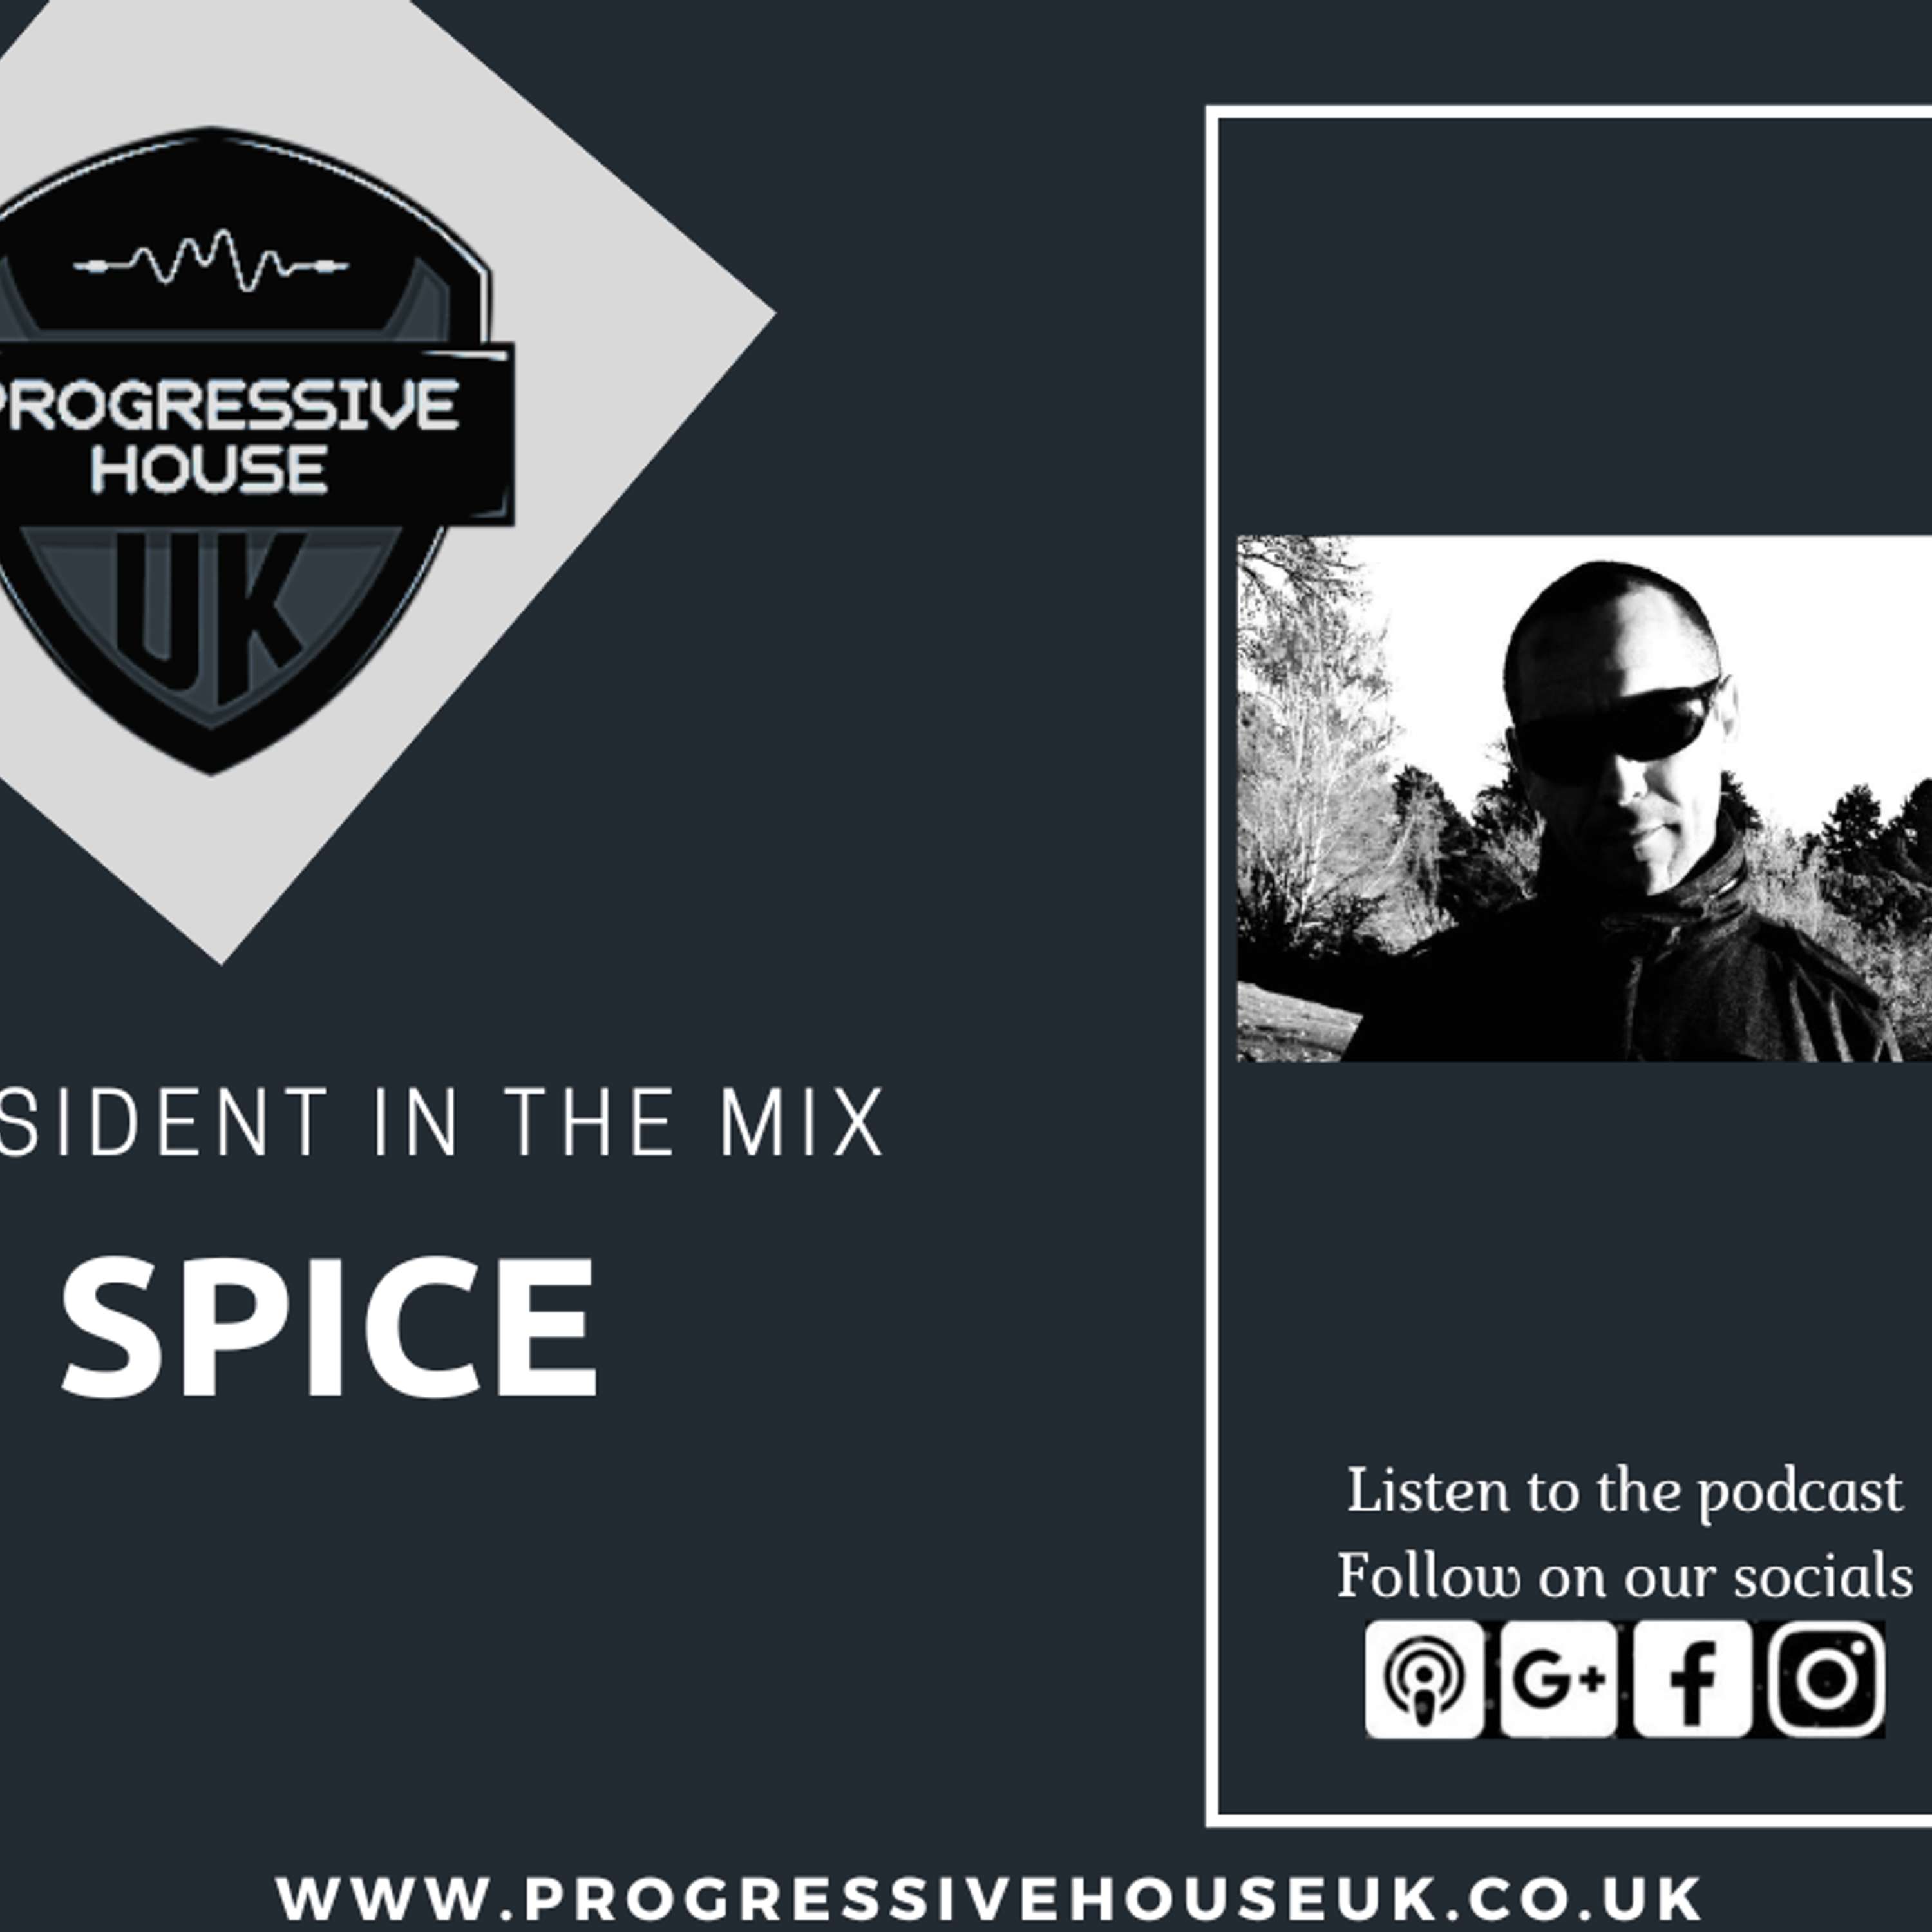 Resident in the mix. Spice.